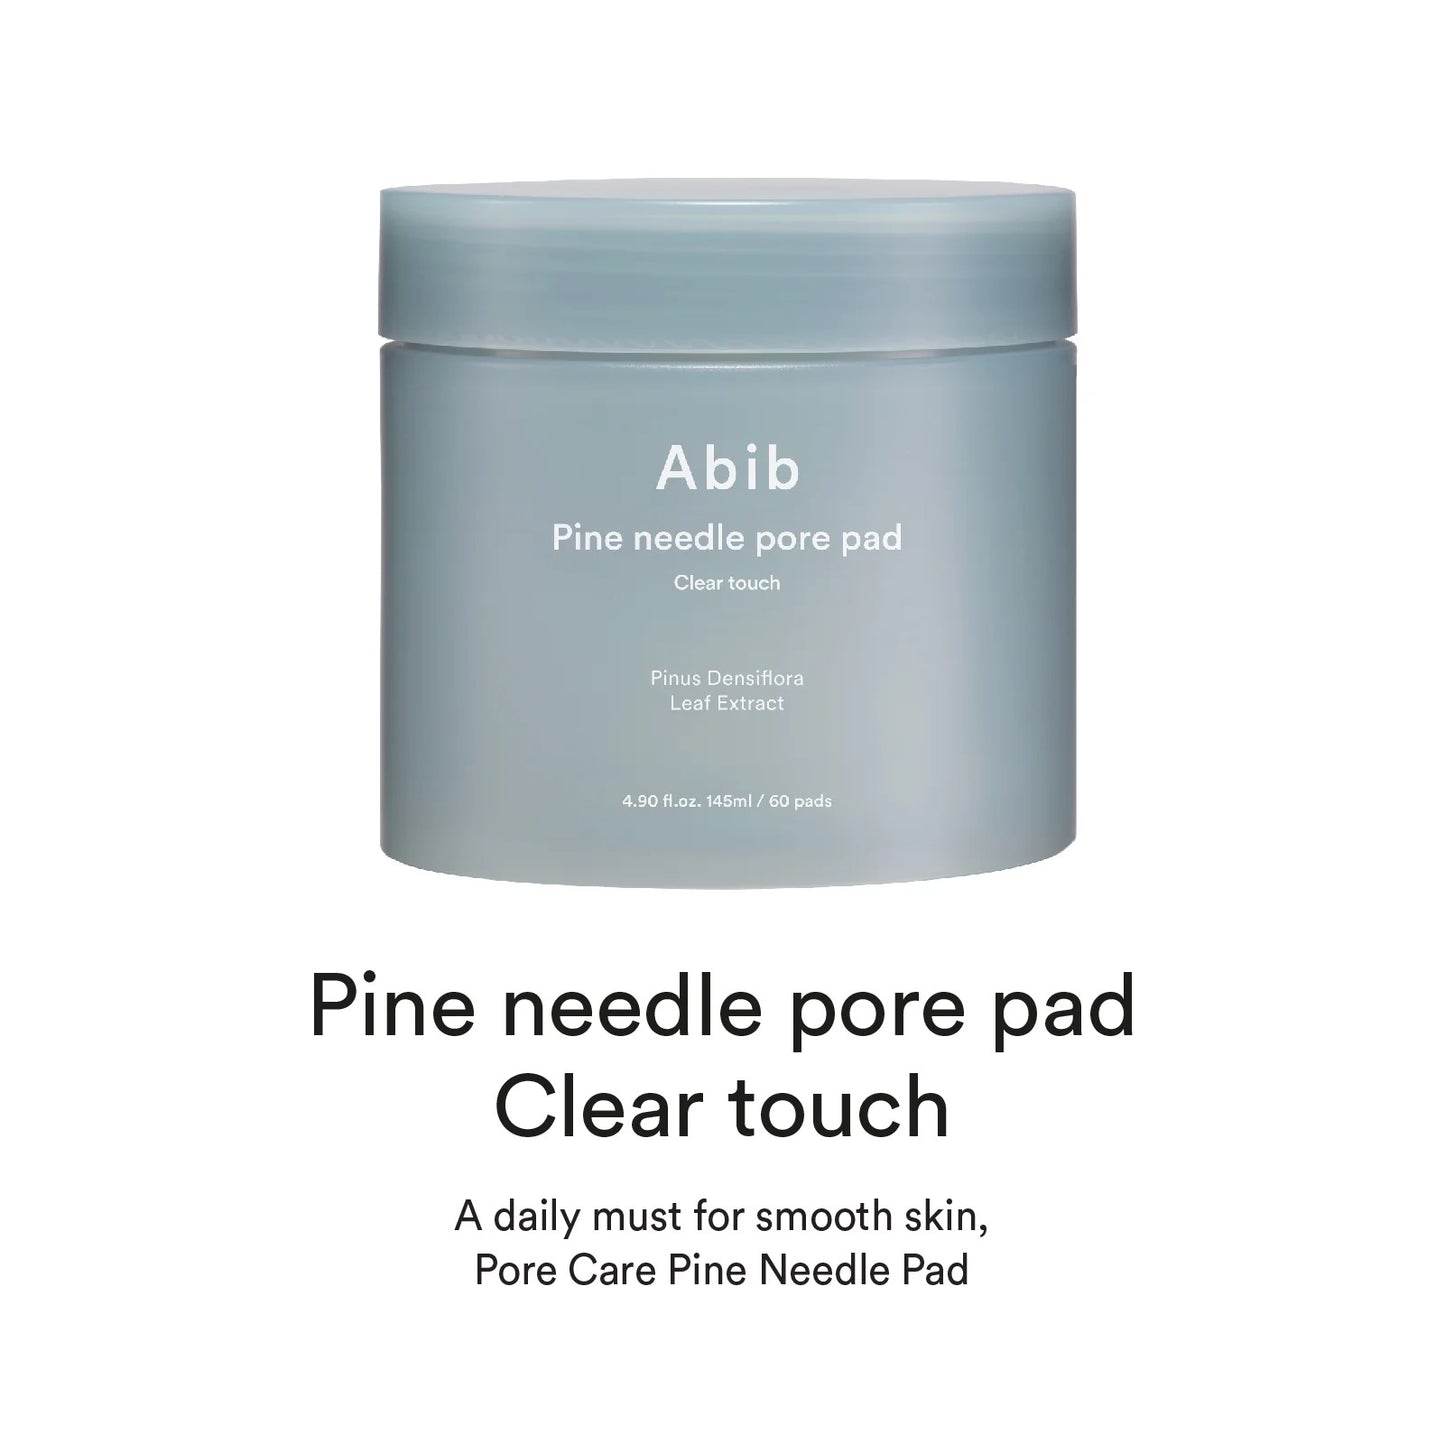 Abib Pine needle pore pad Clear touch - 145ml. 60 pads